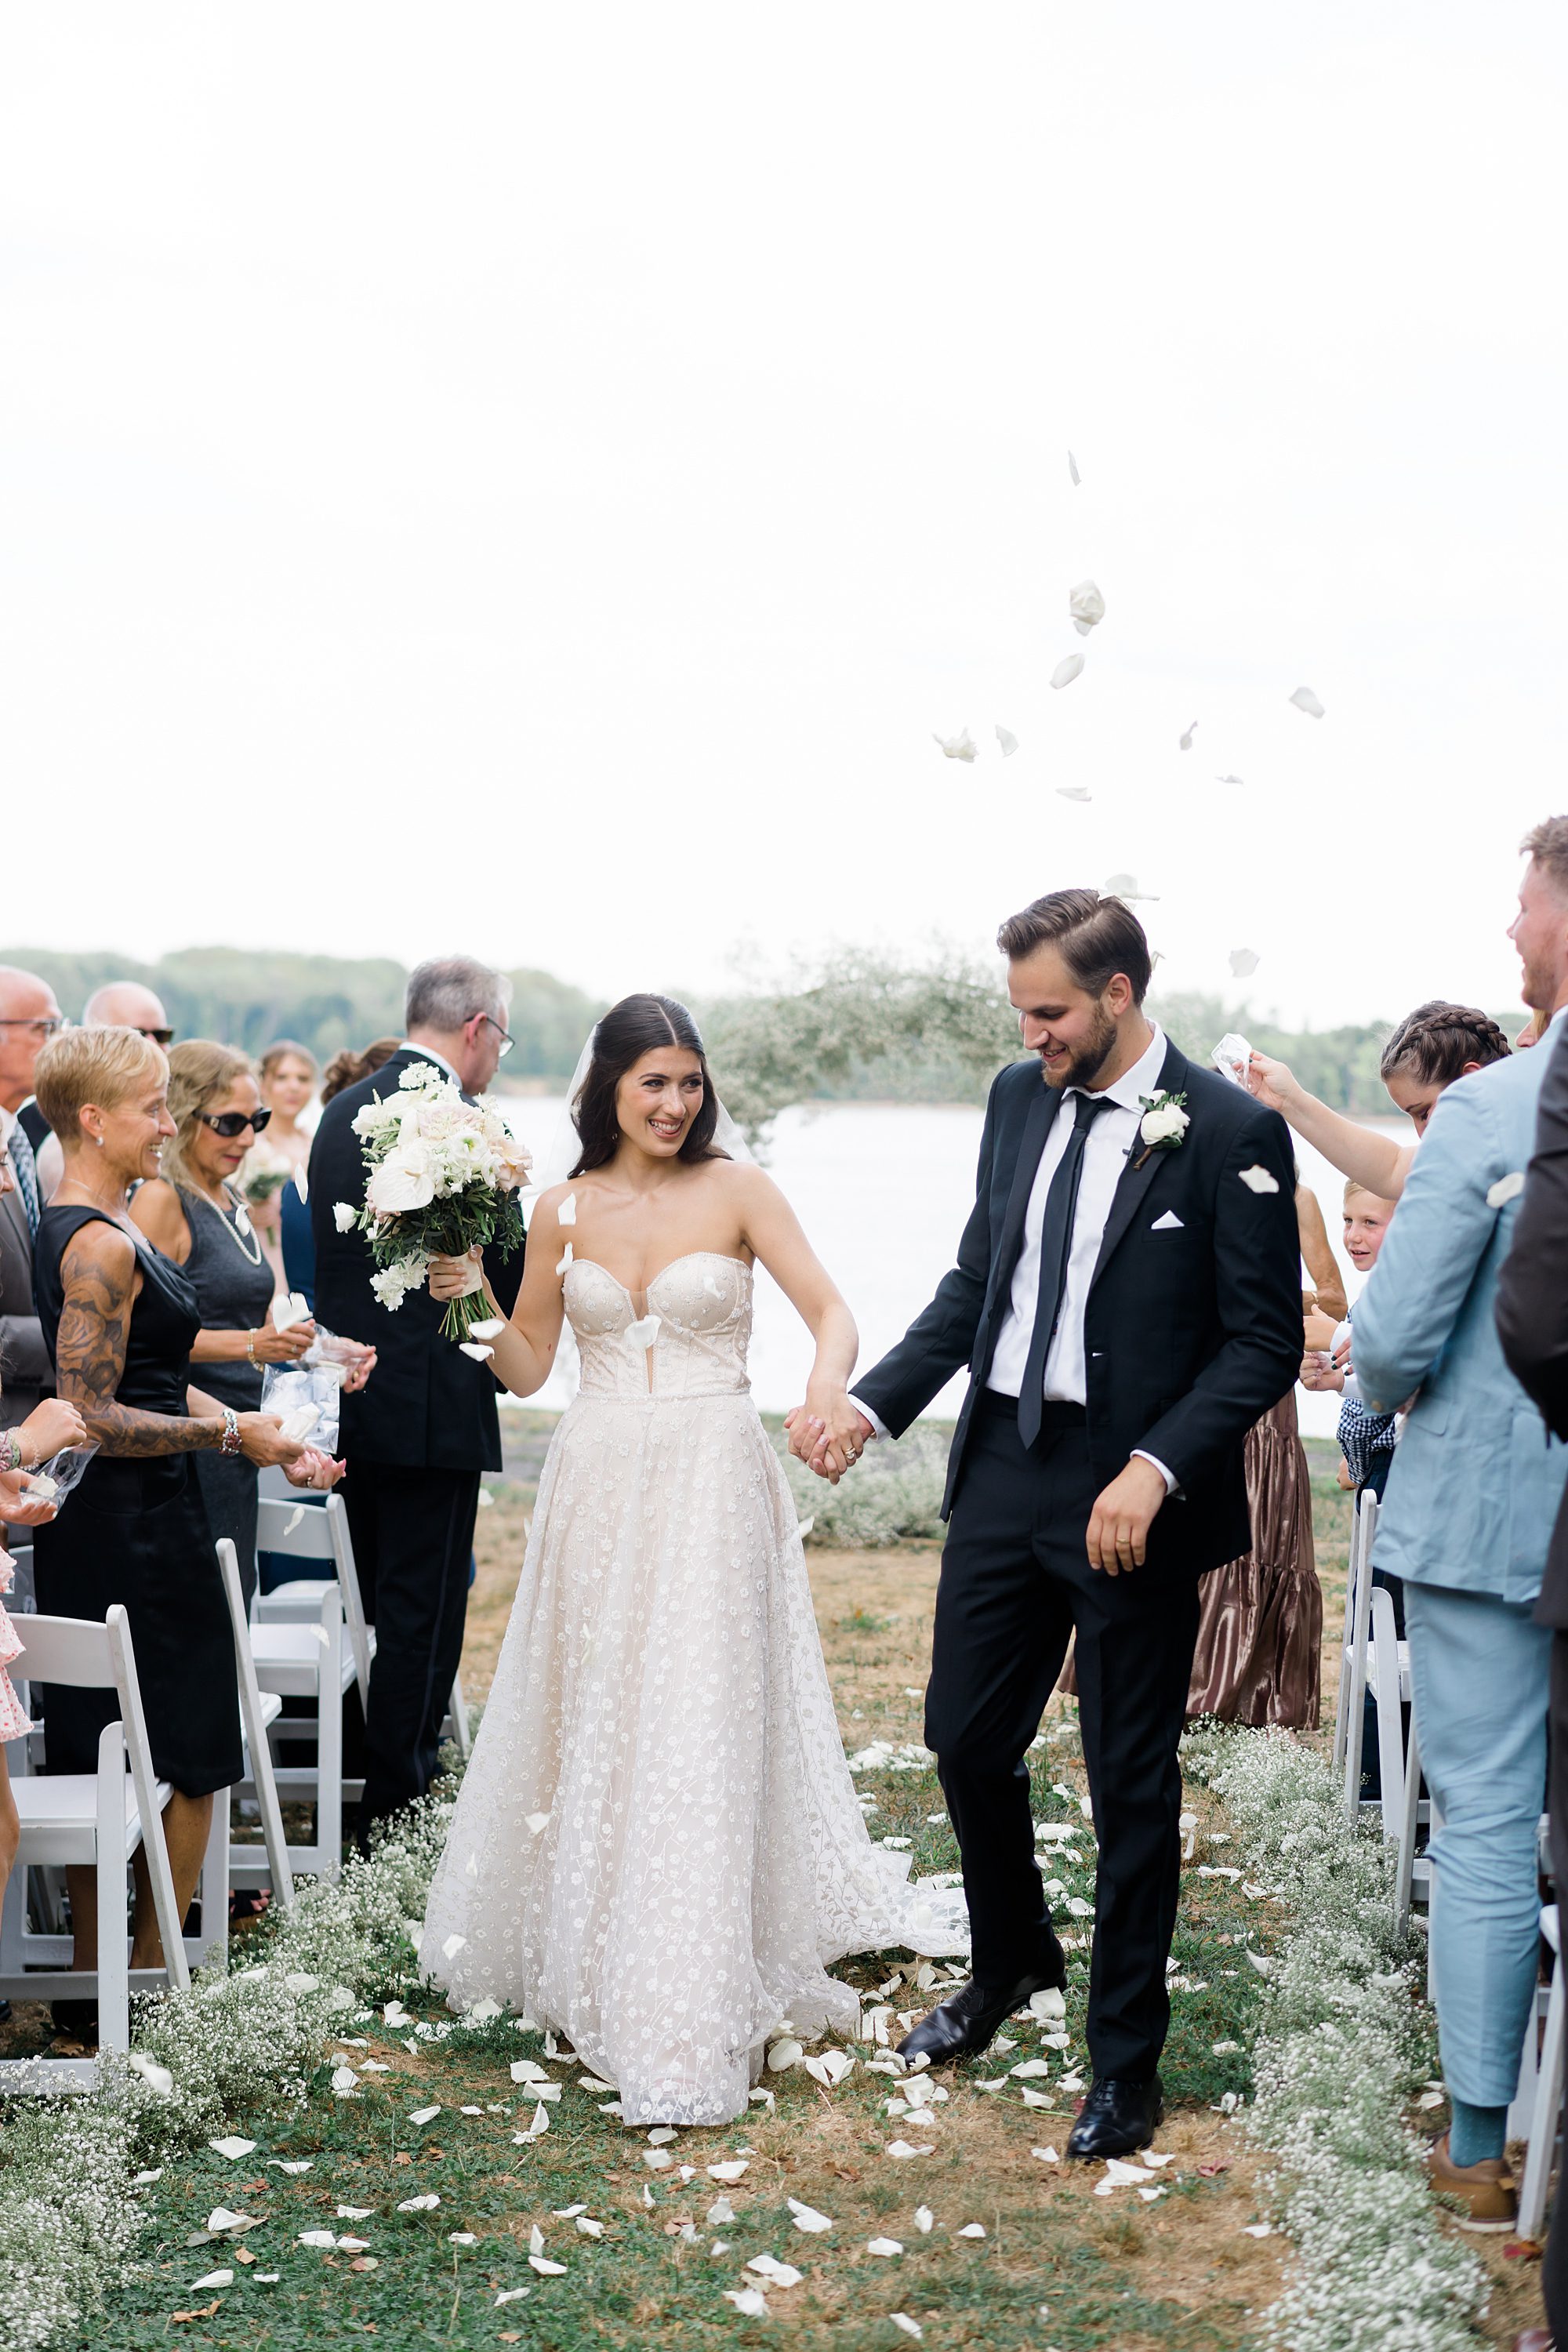 5 Tips for a Picture Perfect Ceremony Exit